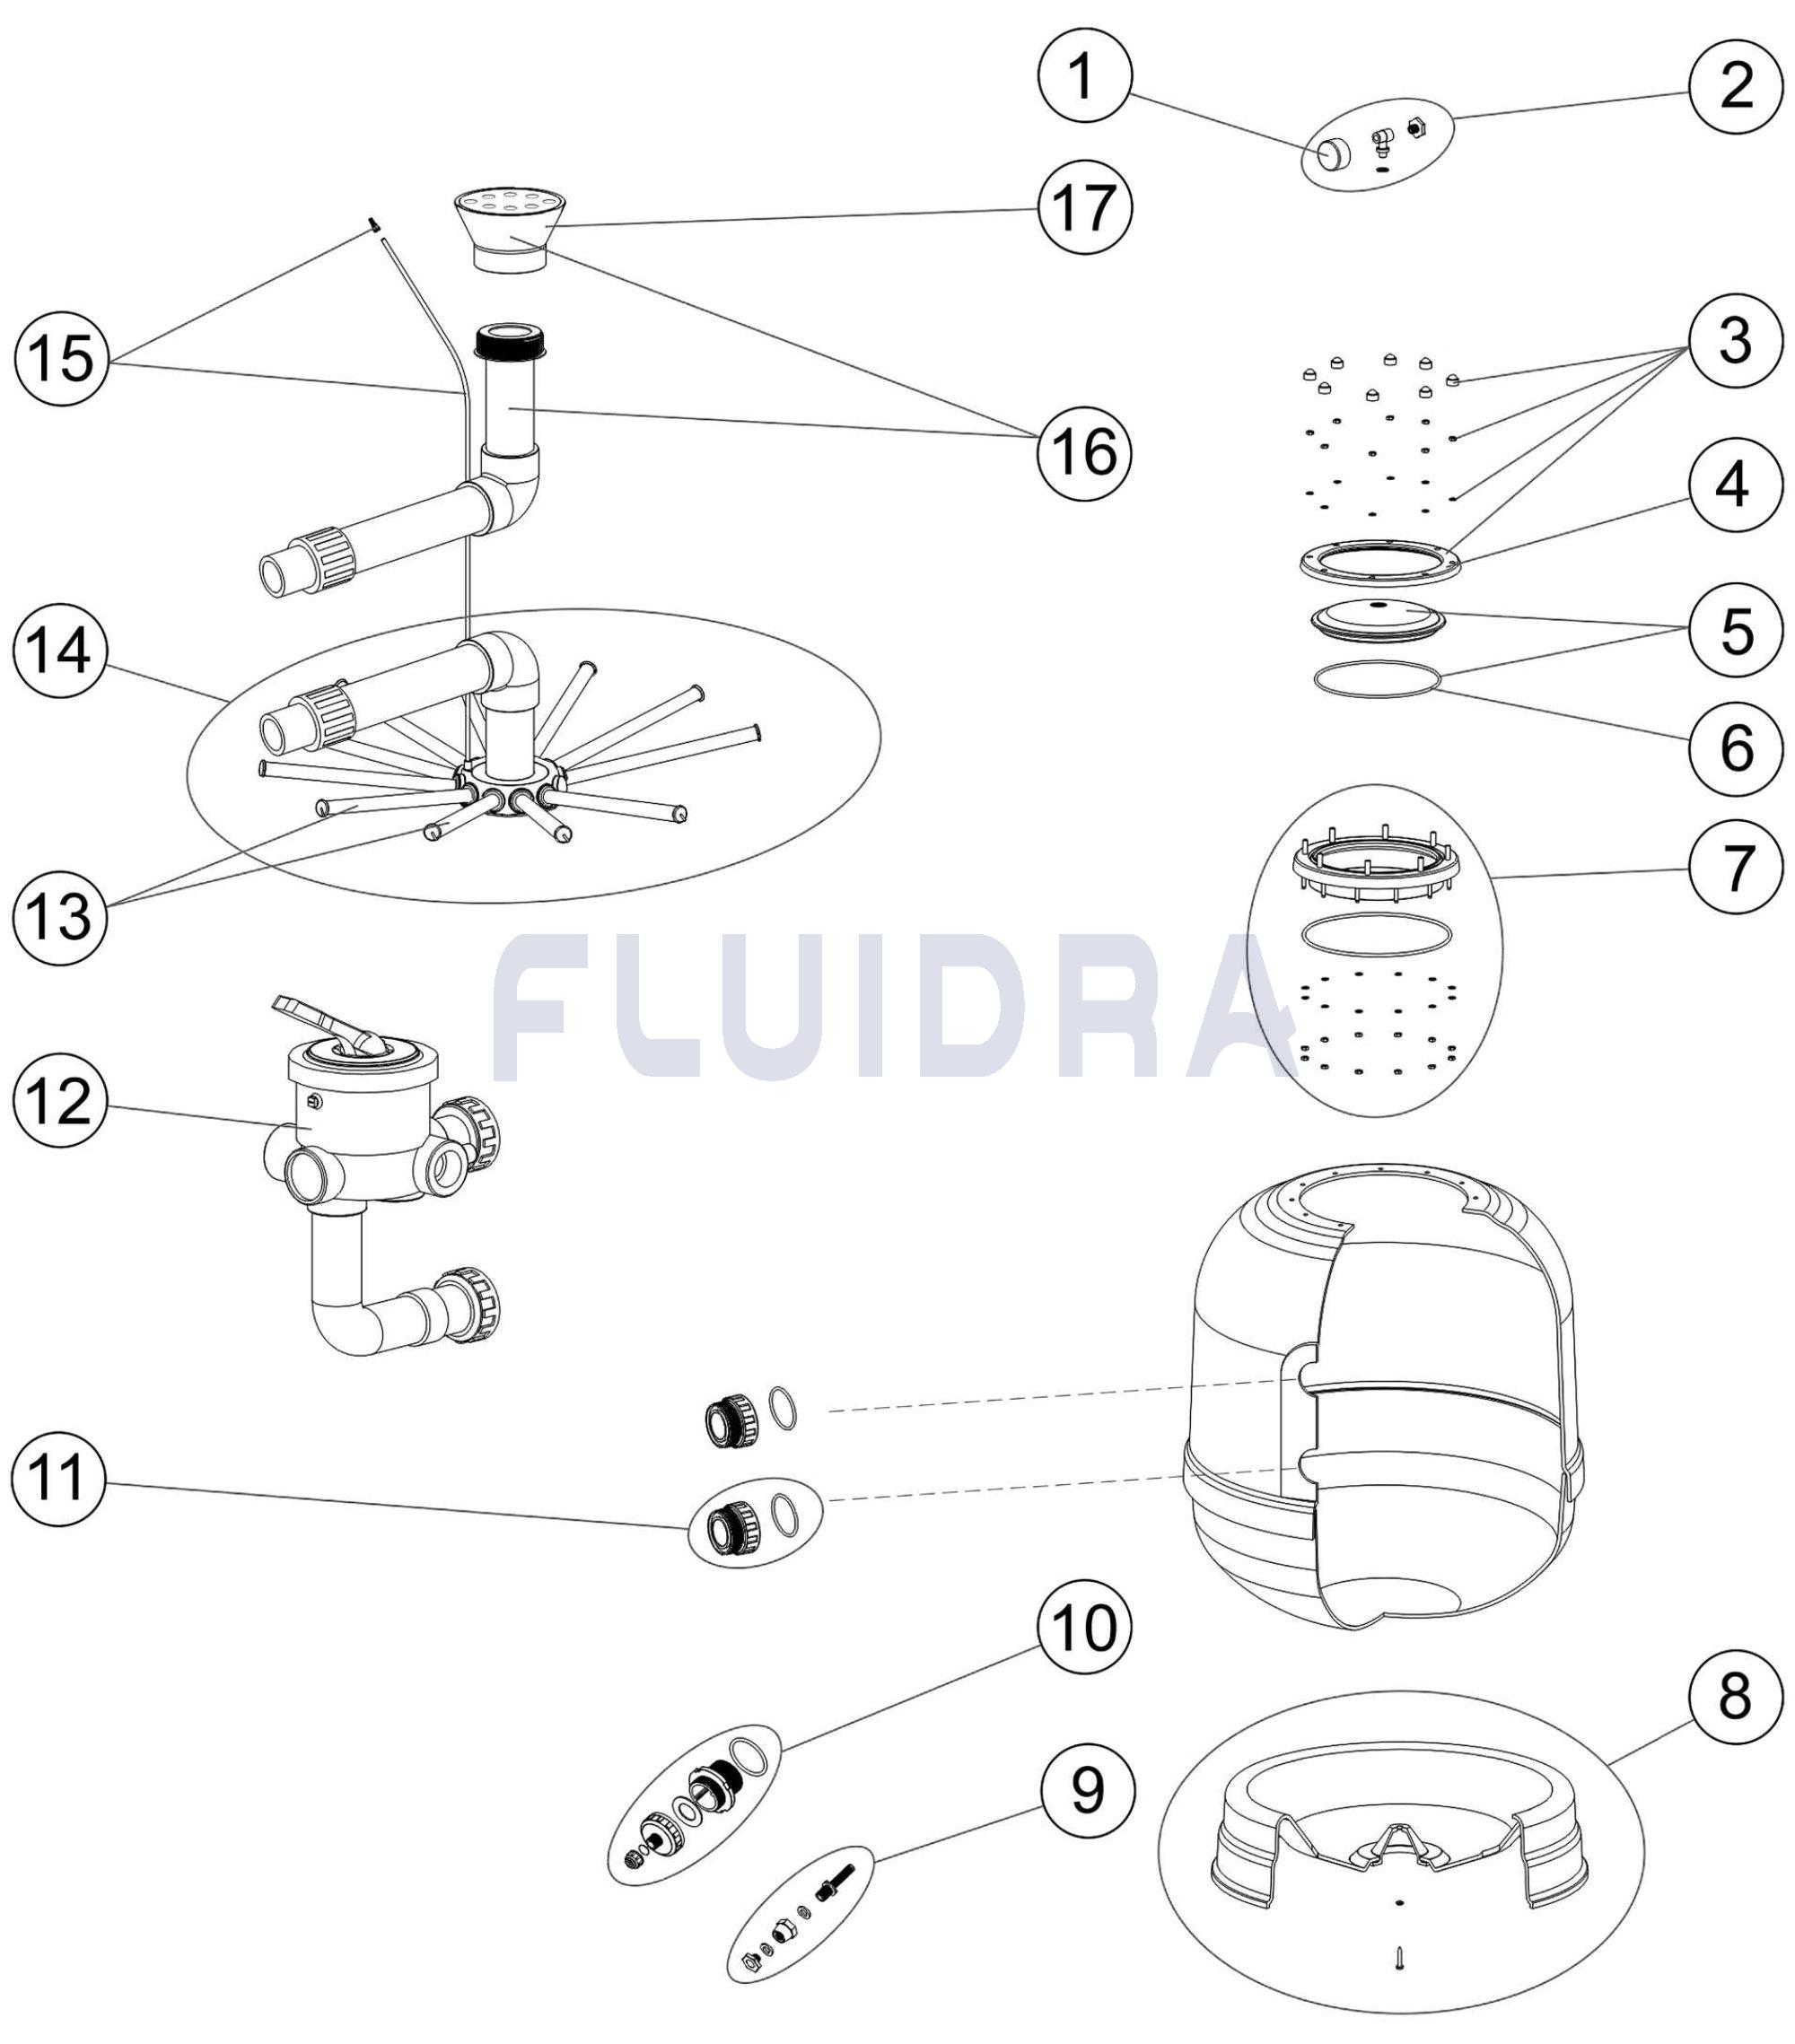 https://spareparts.astralpool.com/en/exploded-view.php?producto=WF000095